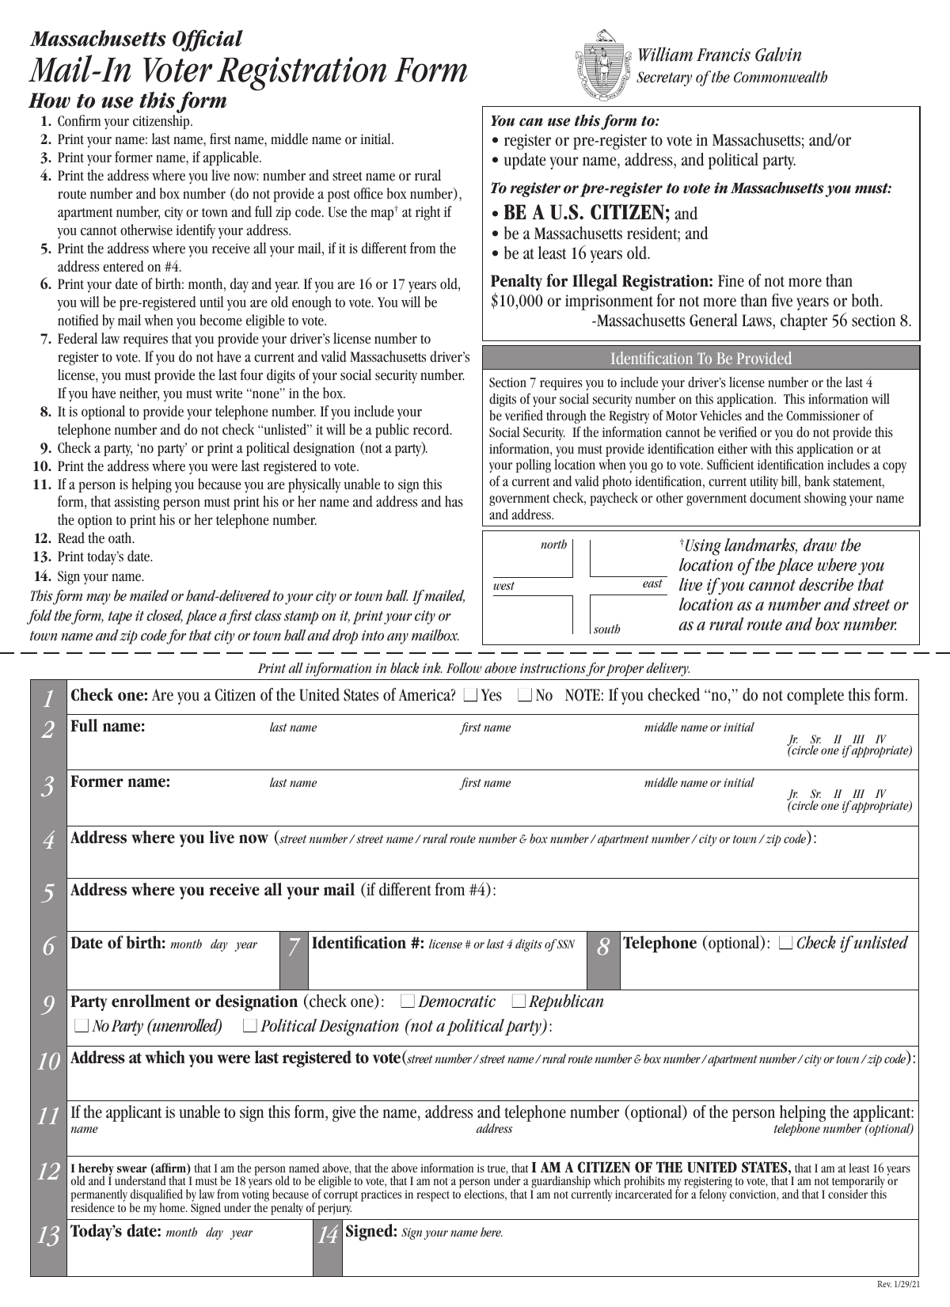 Mail-In Voter Registration Form - Massachusetts, Page 1